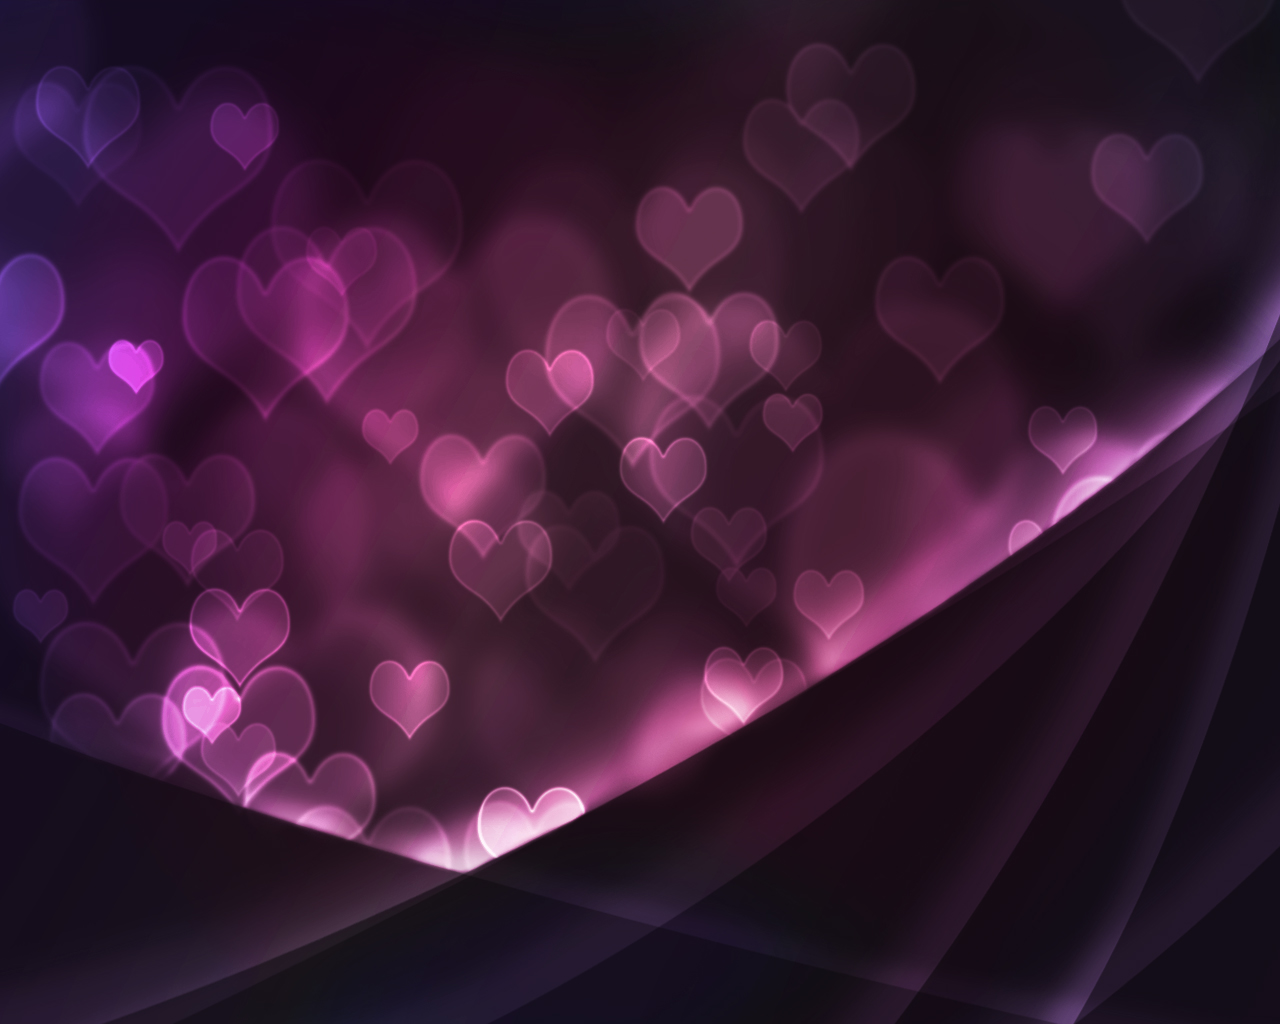 Cool Hearts Background Image